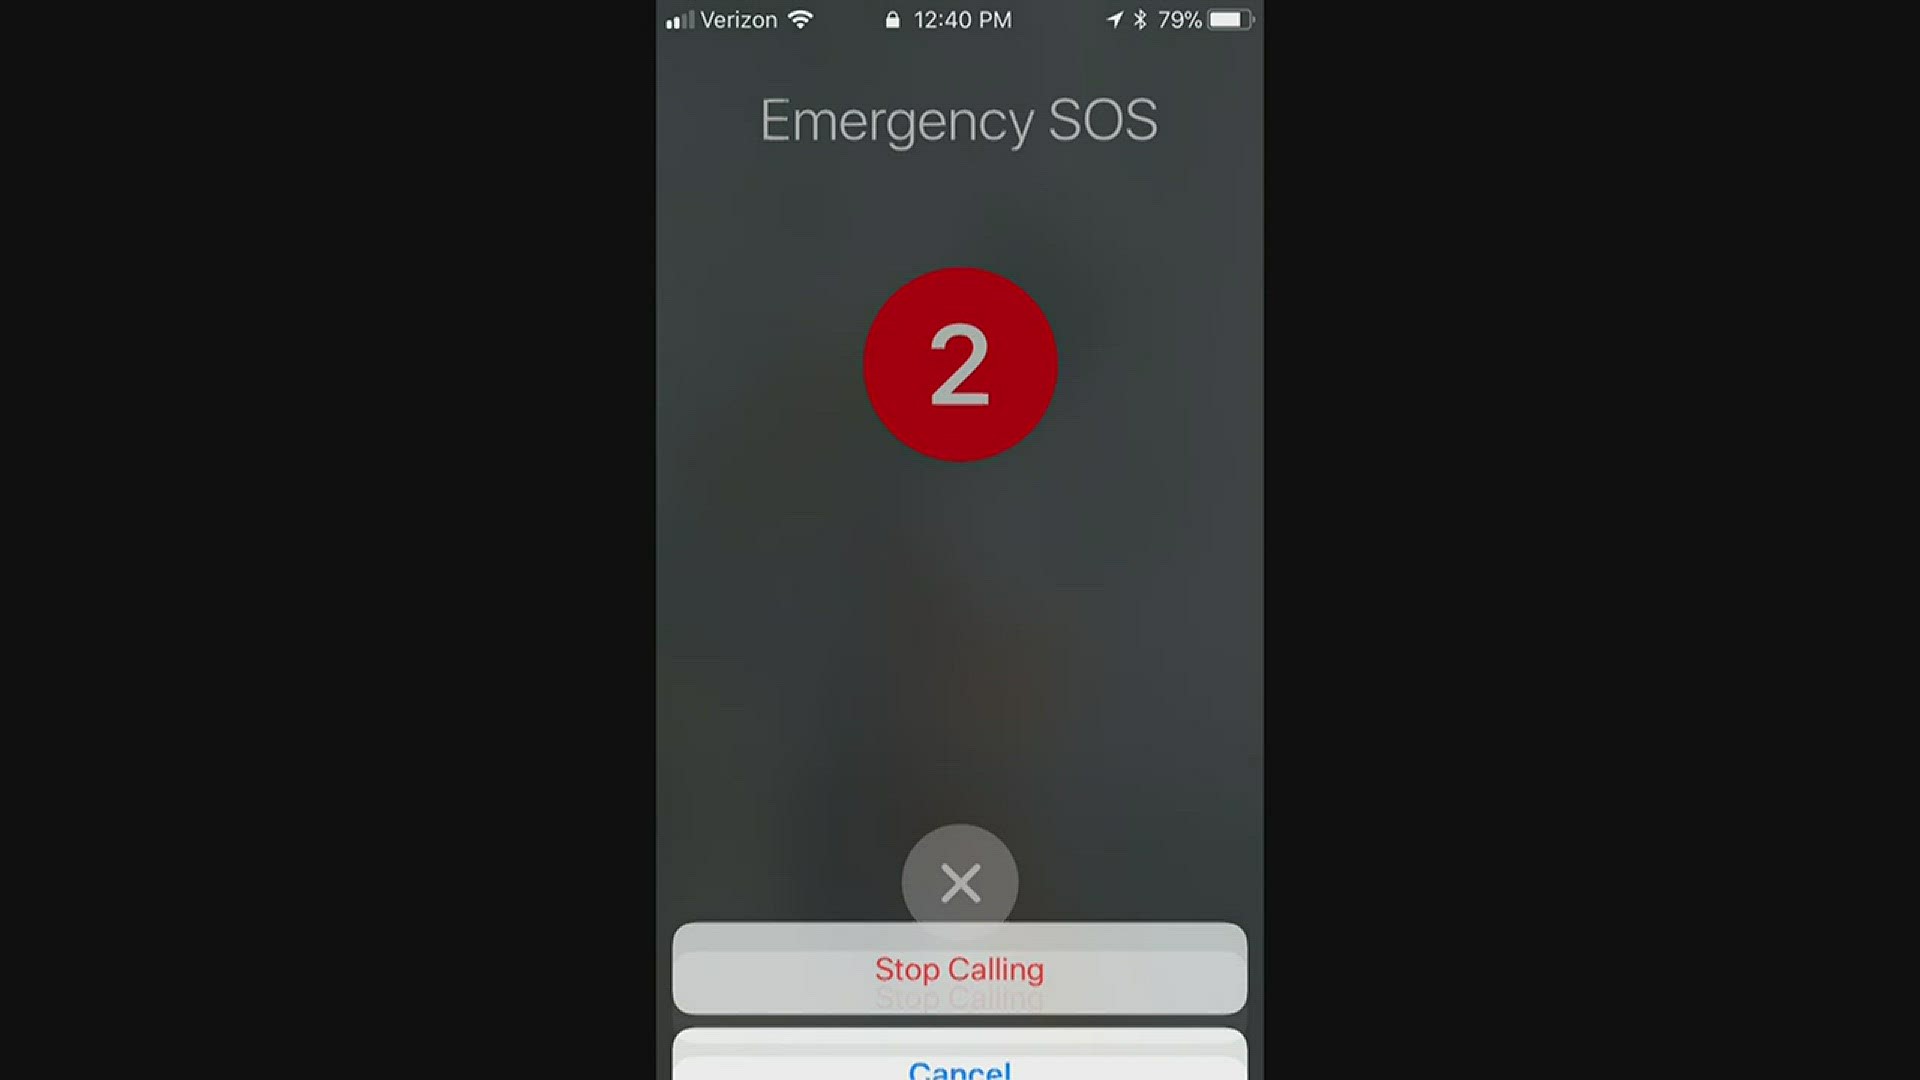 Once on the special lock screen, the user can elect to swipe right on "SOS" to automatically call.